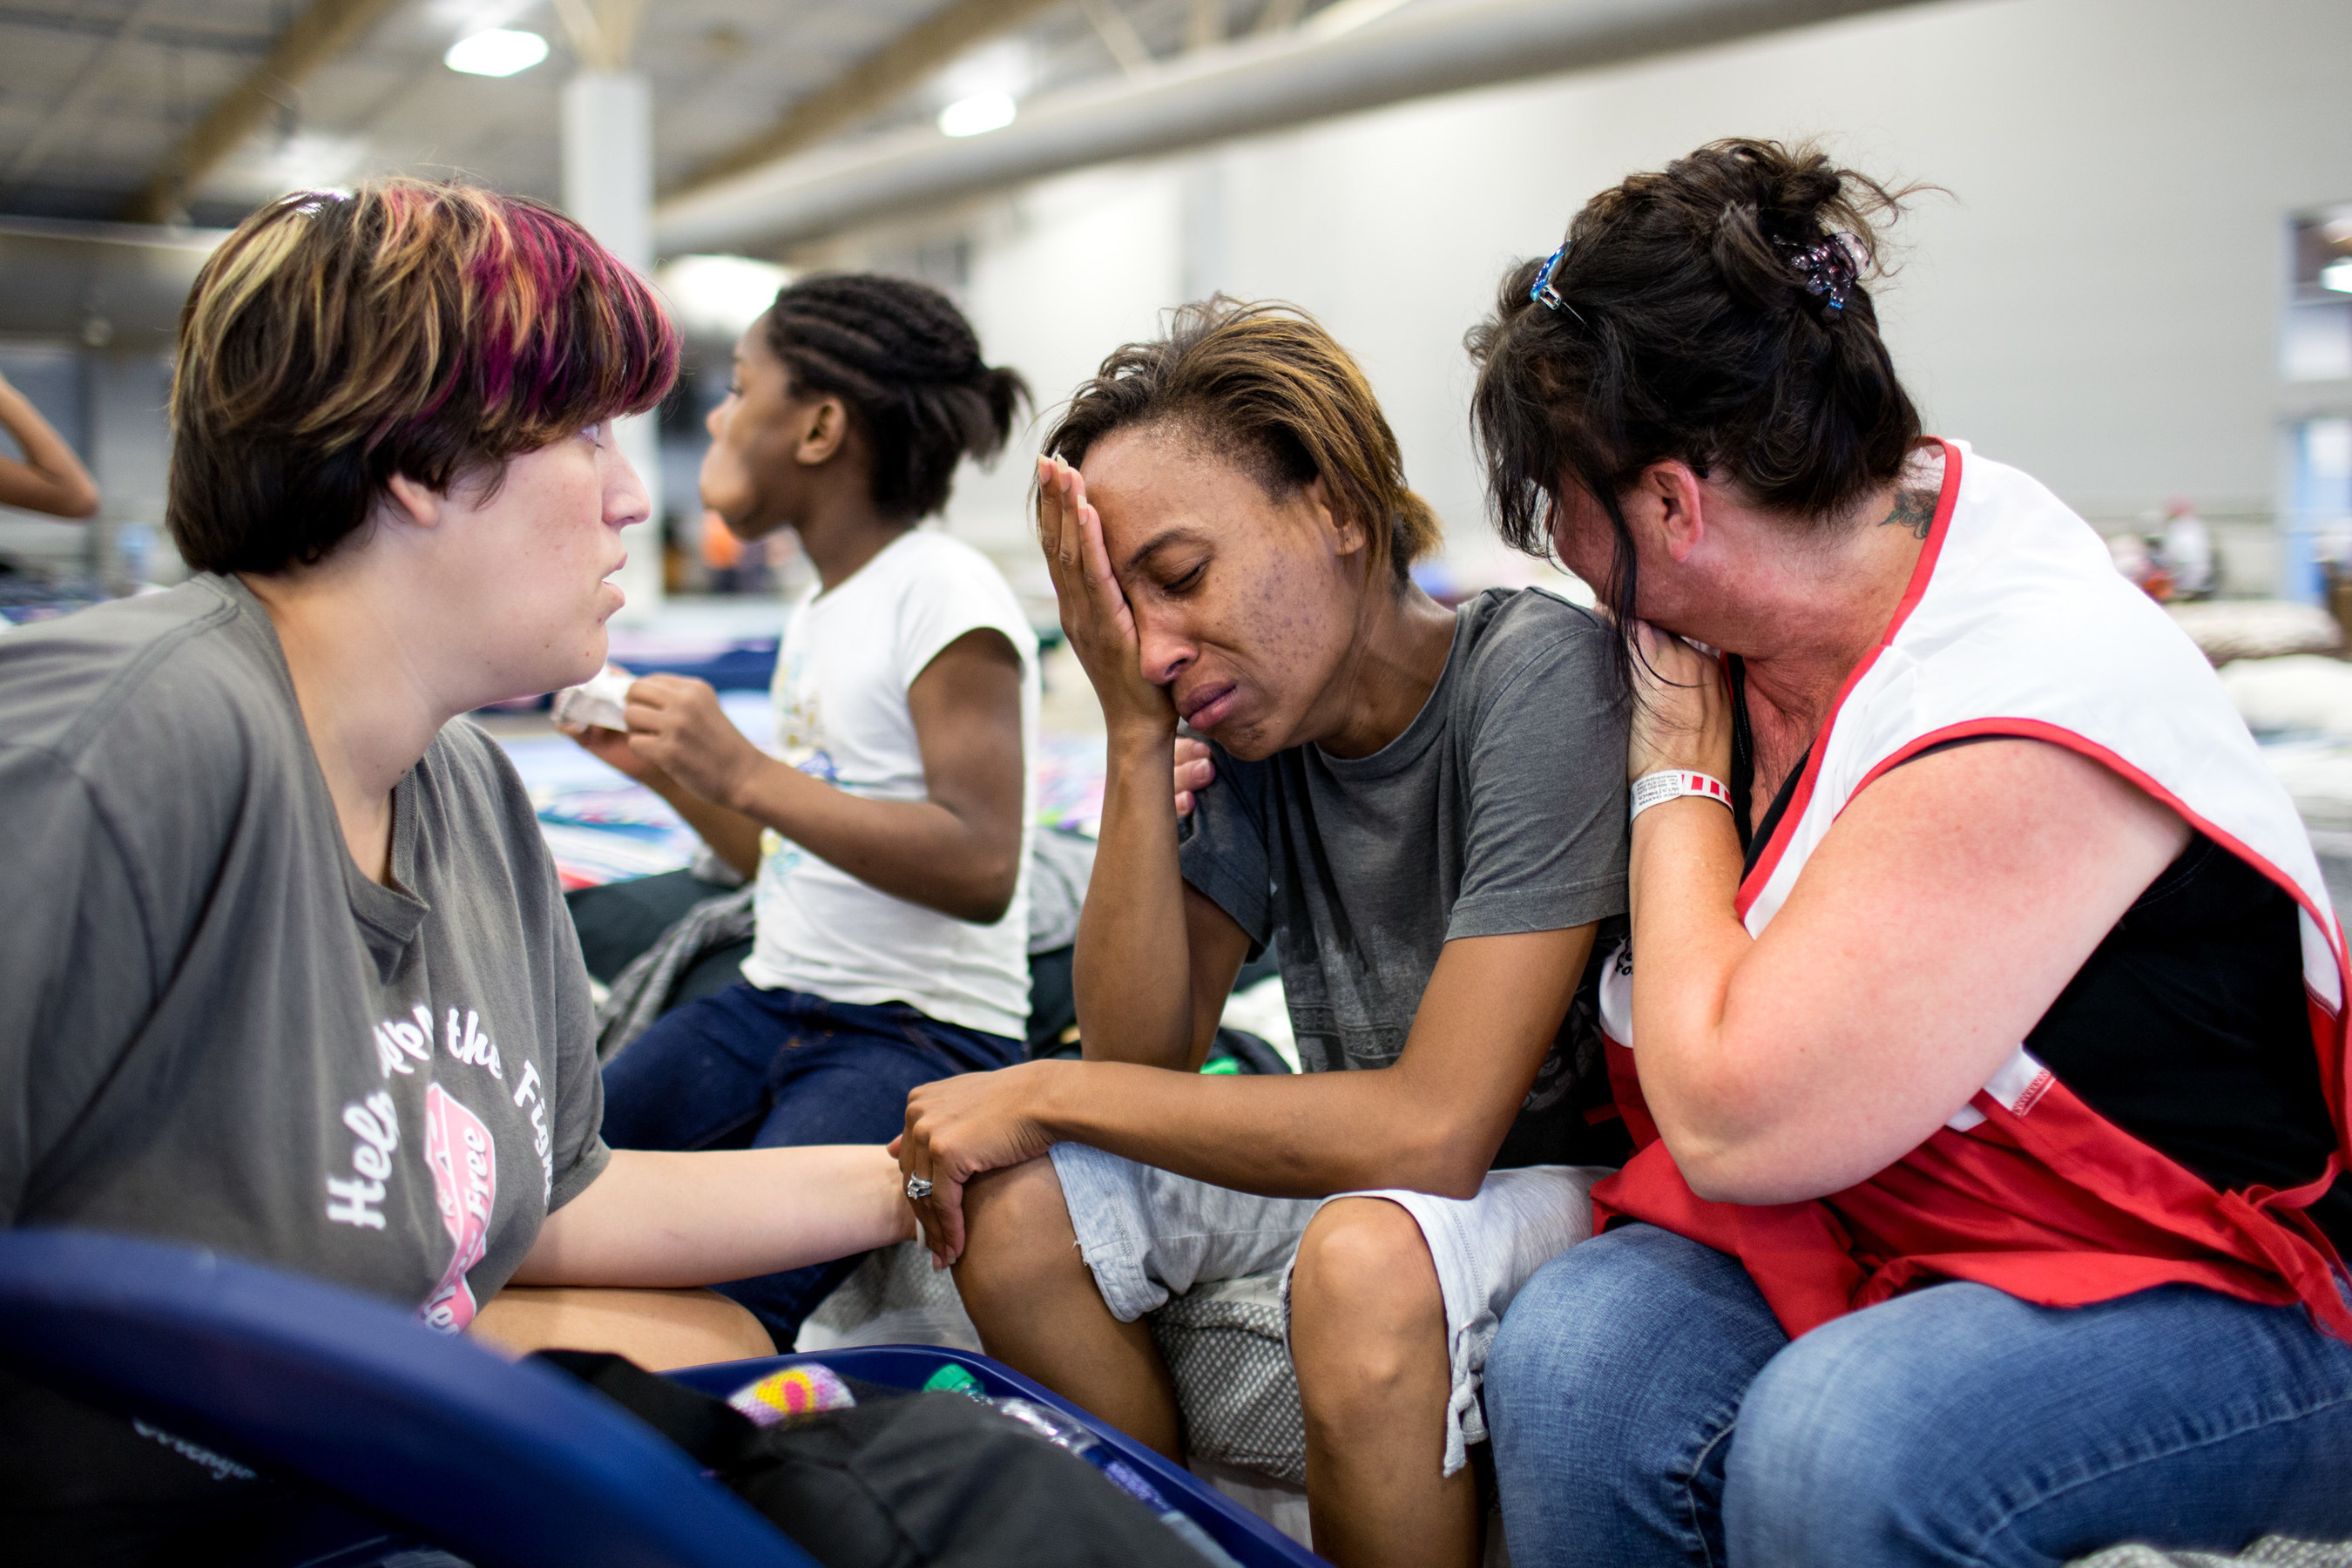 Courtney Robinson (center) is nearly certain that her home is destroyed because of the record flooding in Louisiana. She is staying at a Red Cross shelter with her five children and husband who fled the flood waters with some food and water and a change of clothes for the family. She shared their story with Red Cross relief worker Elizabeth Stander, and Rachel Ambeau, who is also displaced and staying at the Red Cross shelter, in Gonzales, Louisiana. Red Cross Photo by Marko Kokic